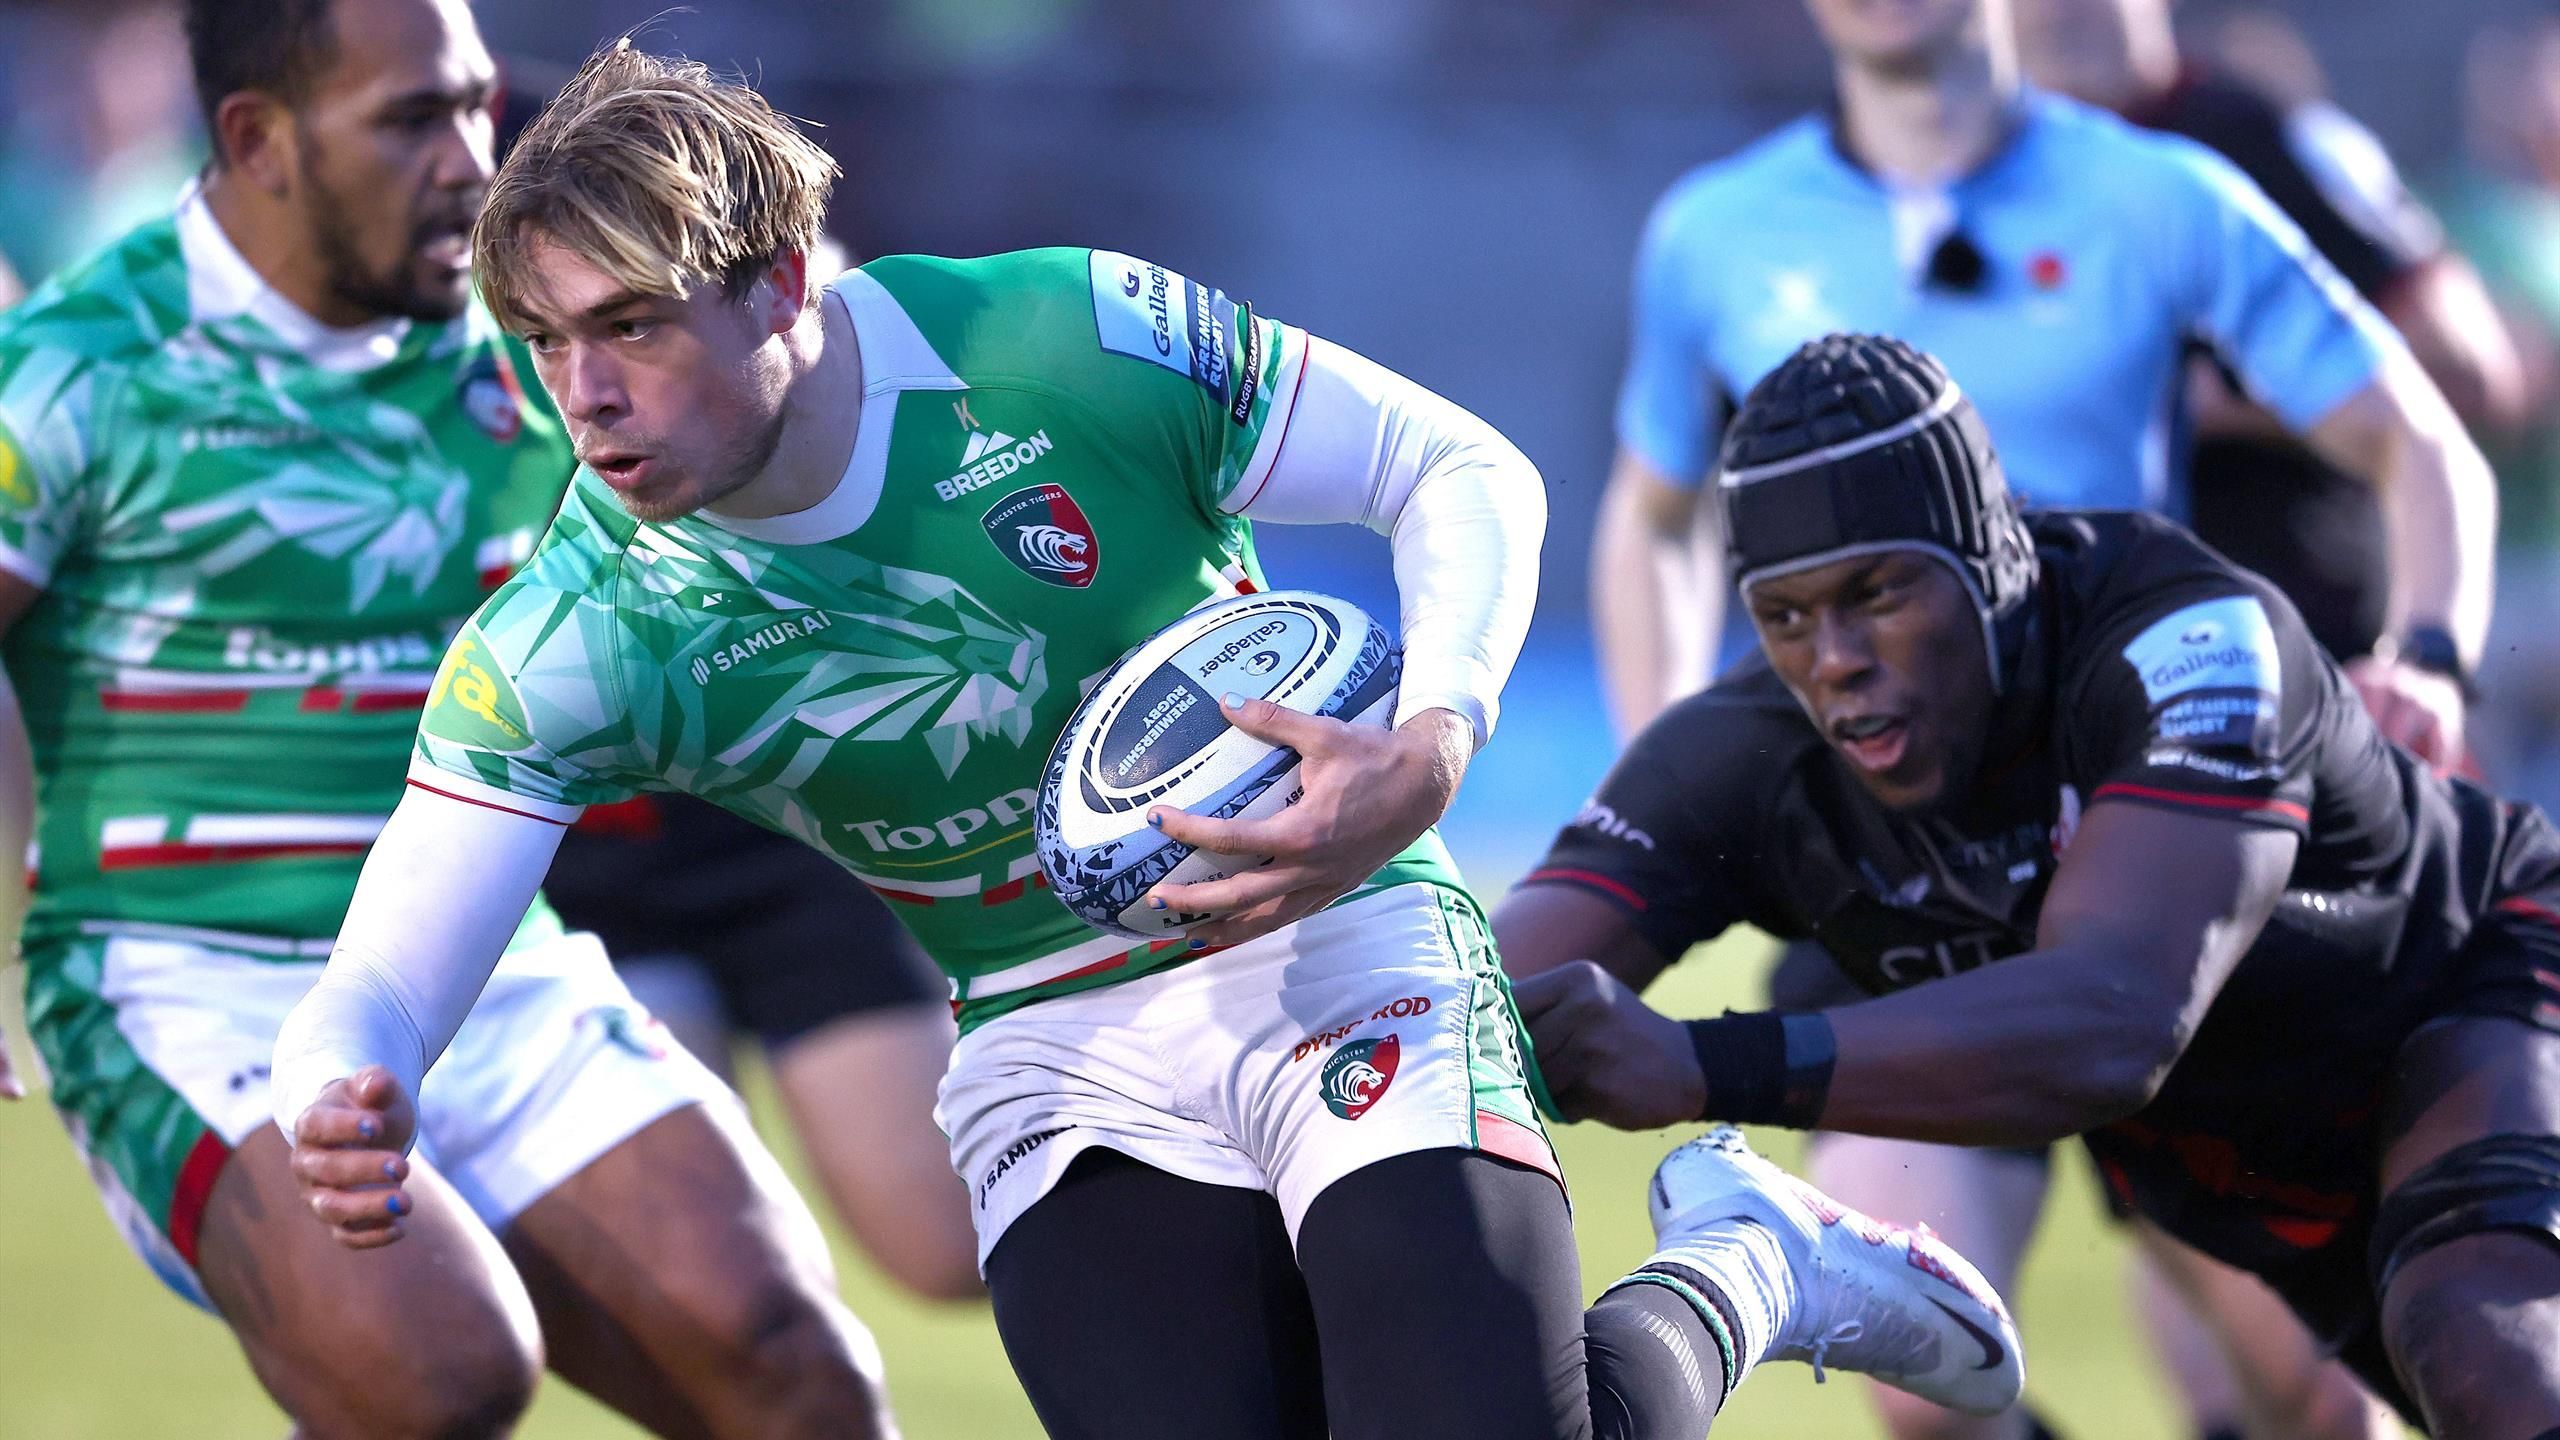 Harlequins vs Leicester Tigers Prediction: An entertaining contest is expected